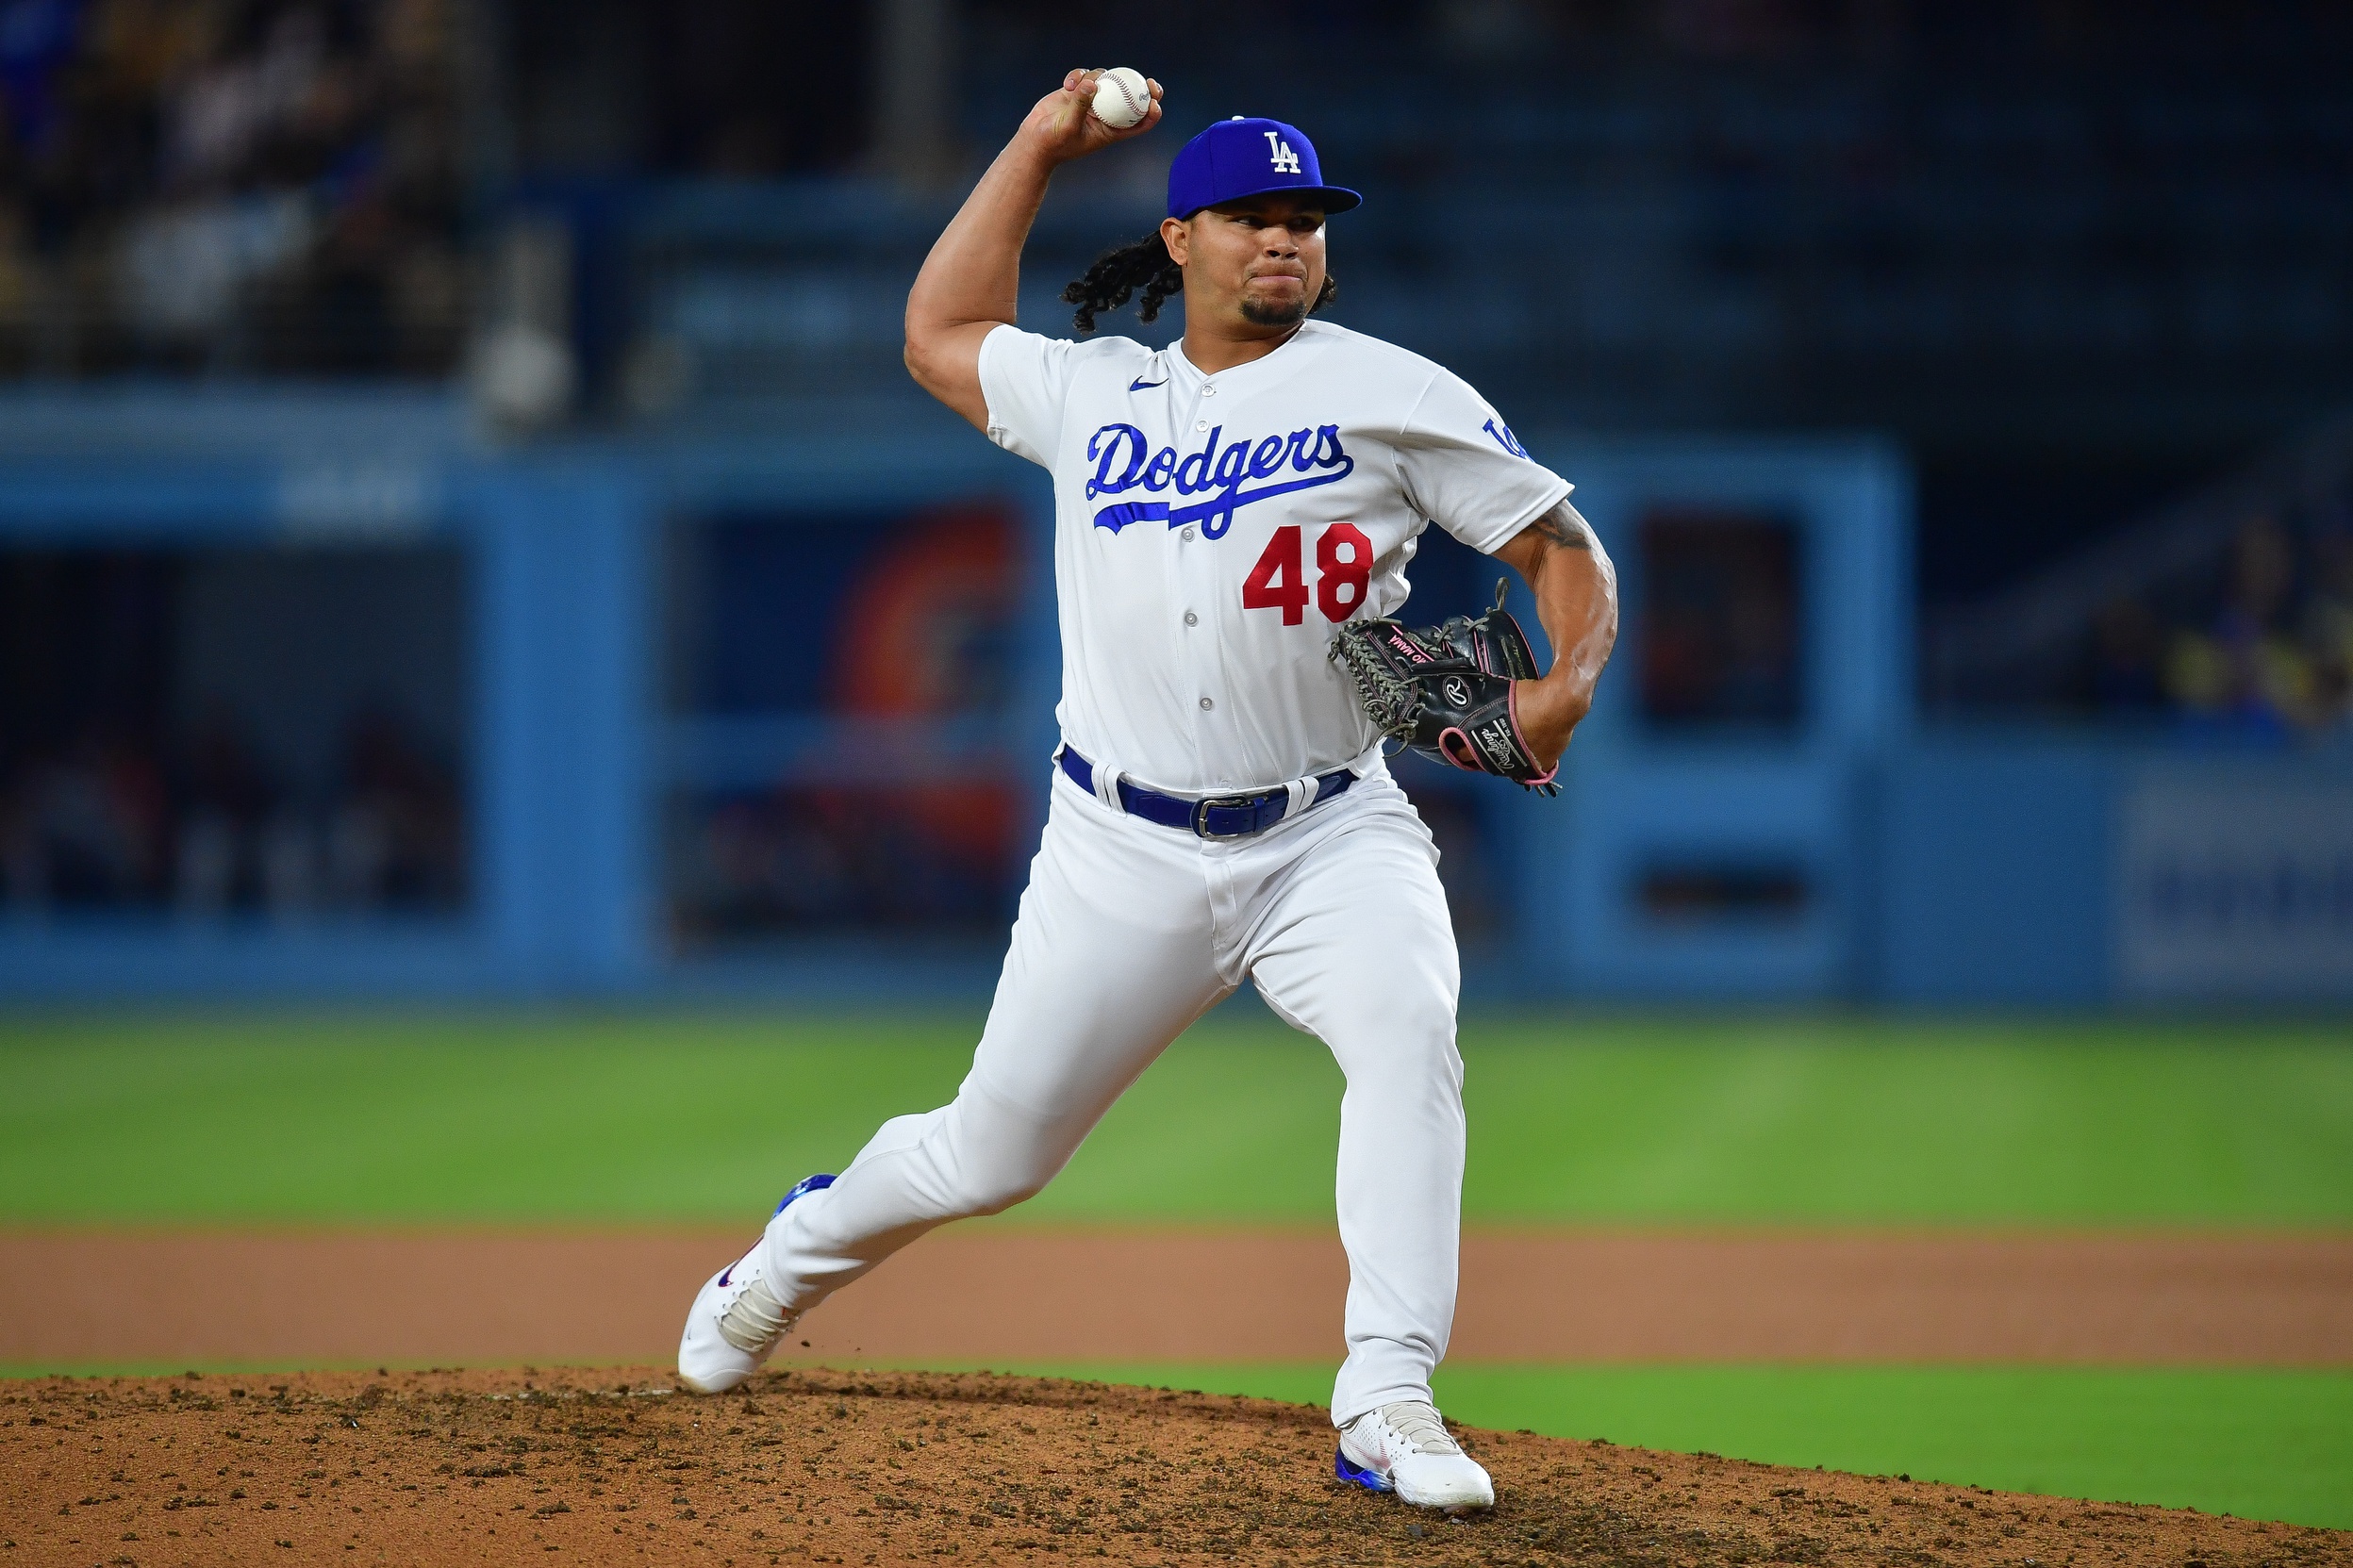 Dodgers Notes: Hudson Has Chance to Return, Graterol’s Emotional Day, Pepiot Continues to Ascend